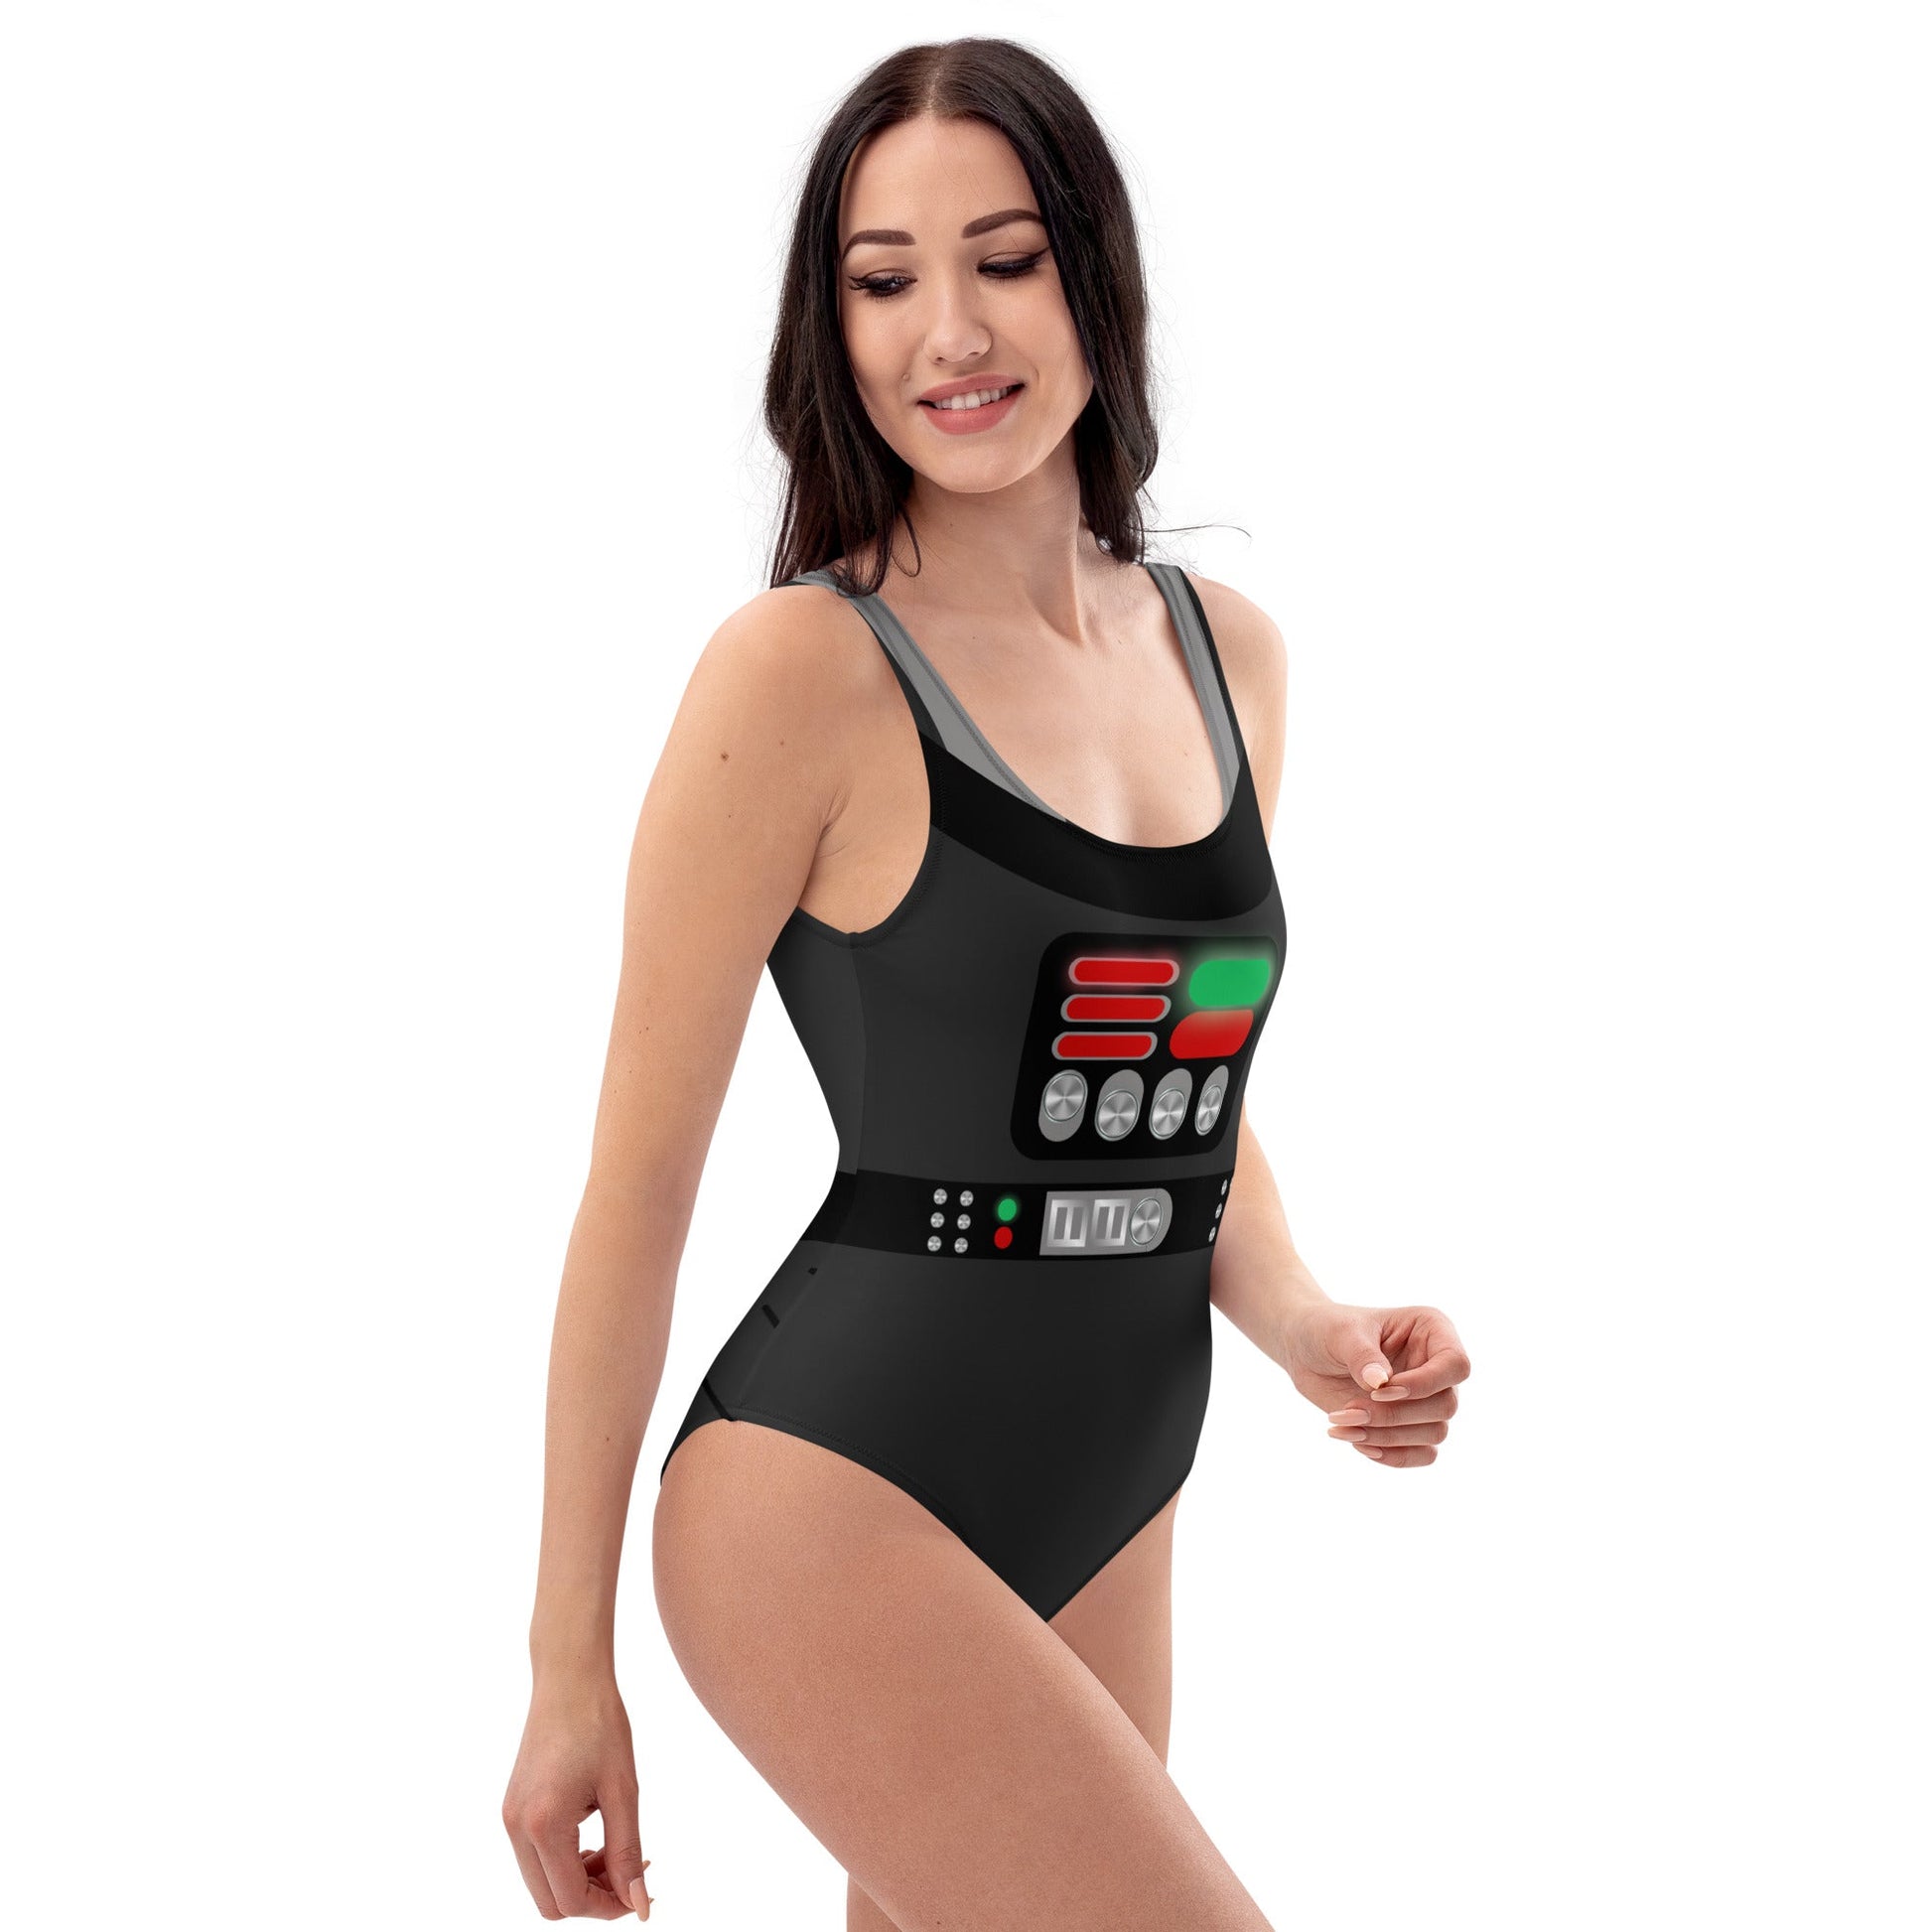 Dark side One-Piece Swimsuit Darth vaderdisney cruiseWrong Lever Clothing